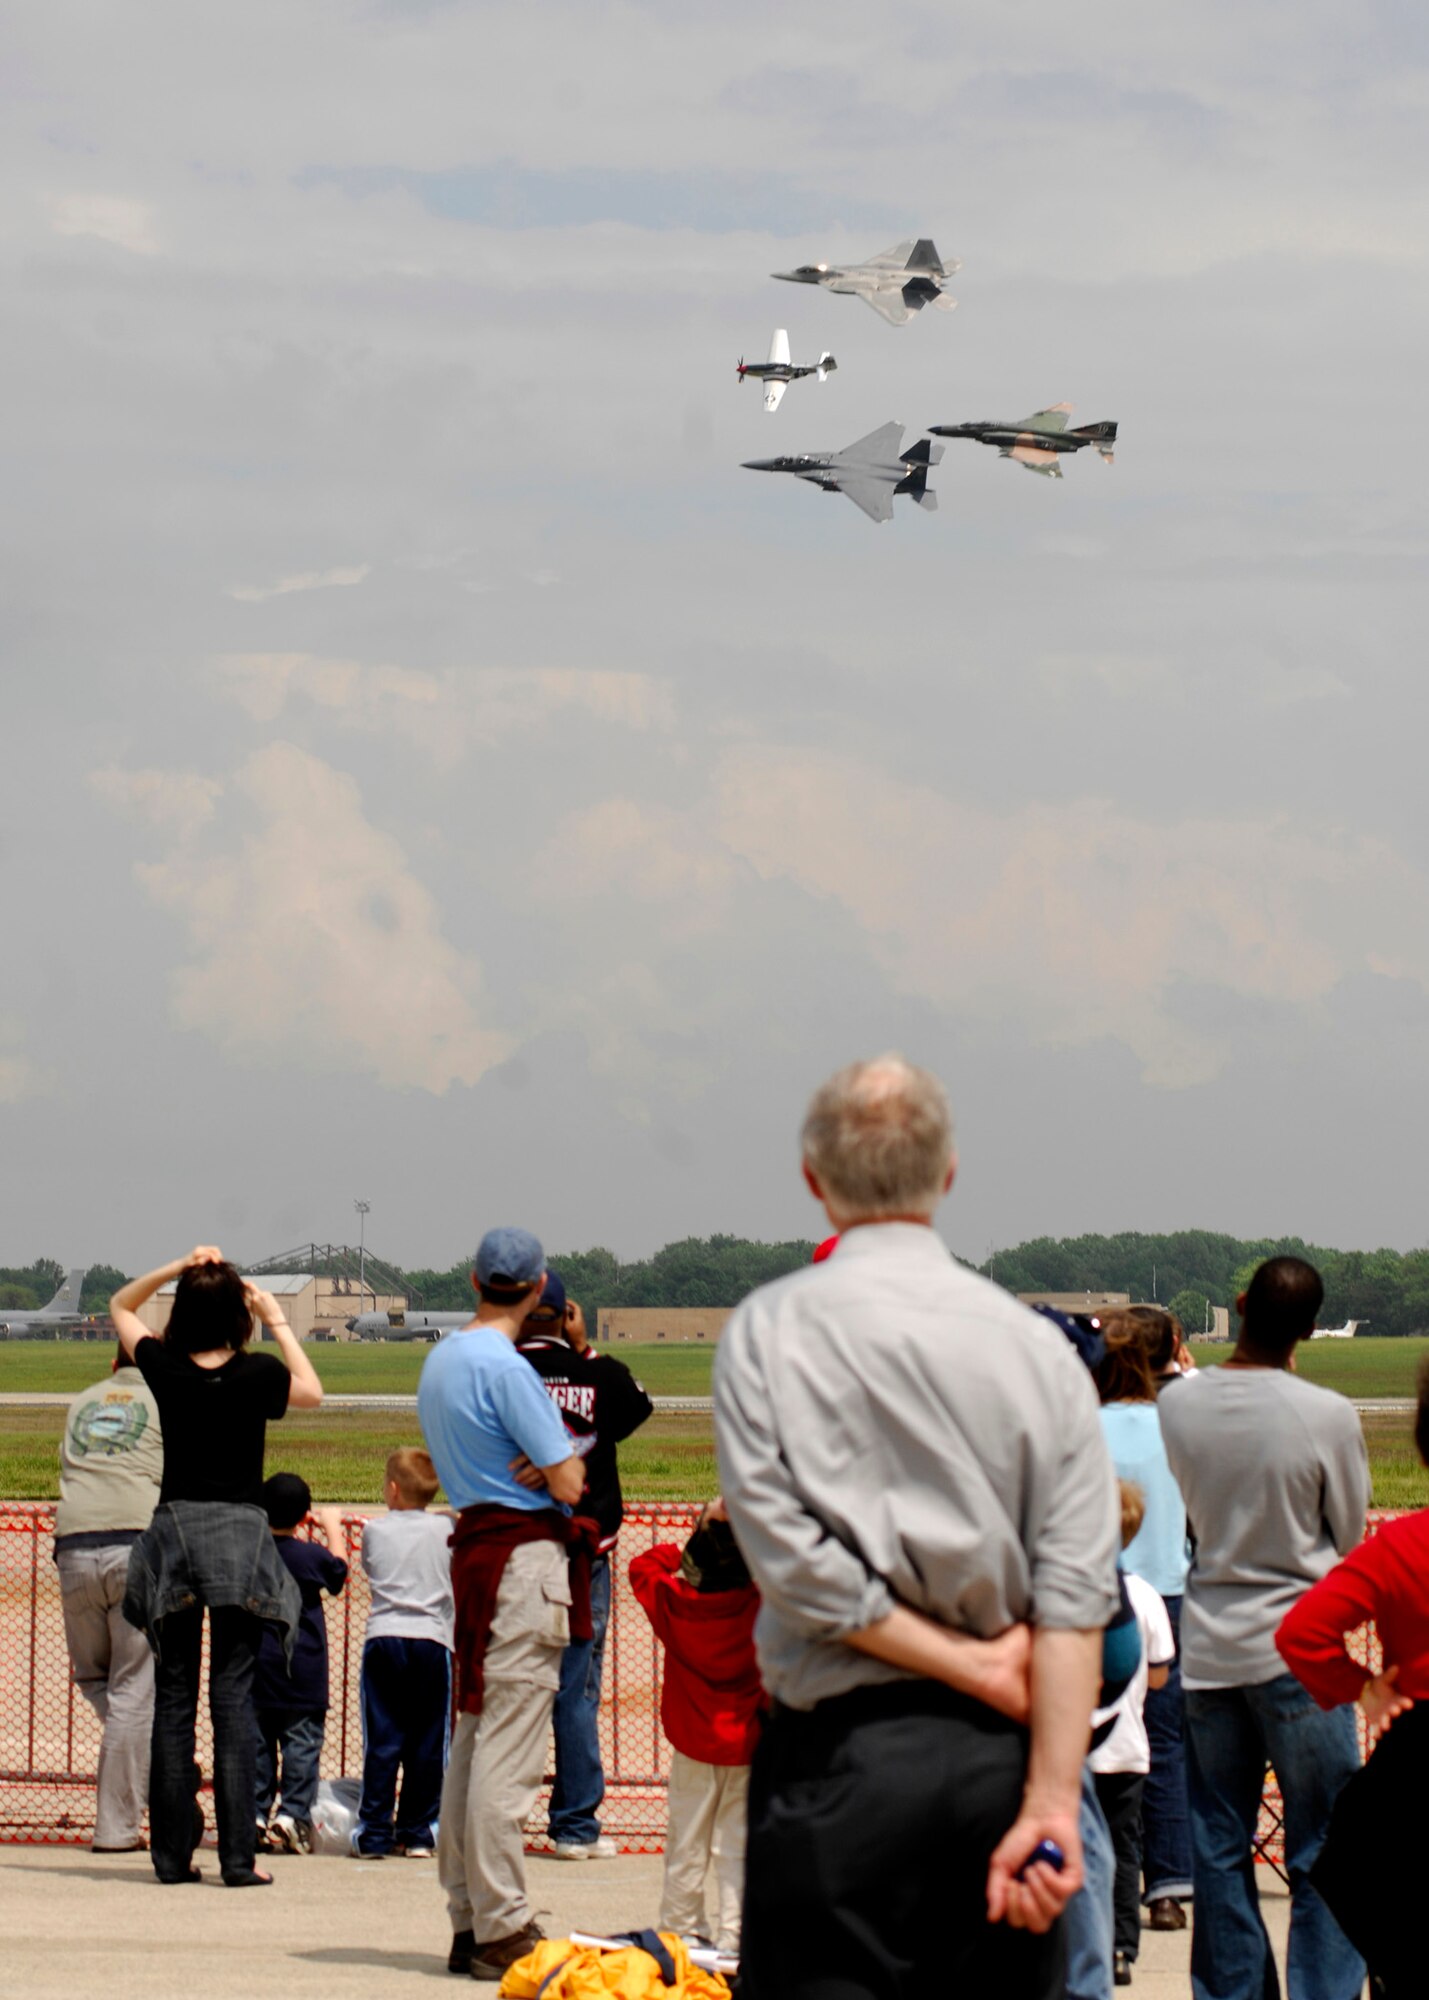 The crowd watches a formation fly by at the 2008 Joint Service Open House hosted by Andrews Air Force Base, Md., May 16th.   This year?s event will have demonstrations by the Navy Blue Angels and the Army's Golden Knights.  Once again the JSOH will host a wide variety of both military and civilian air and ground demonstrations. To include the Air Force's newest and the world's most advanced fighter jet, the F-22A Raptor. (U.S. Air Force photo by Tech Sgt. Suzanne M. Day)